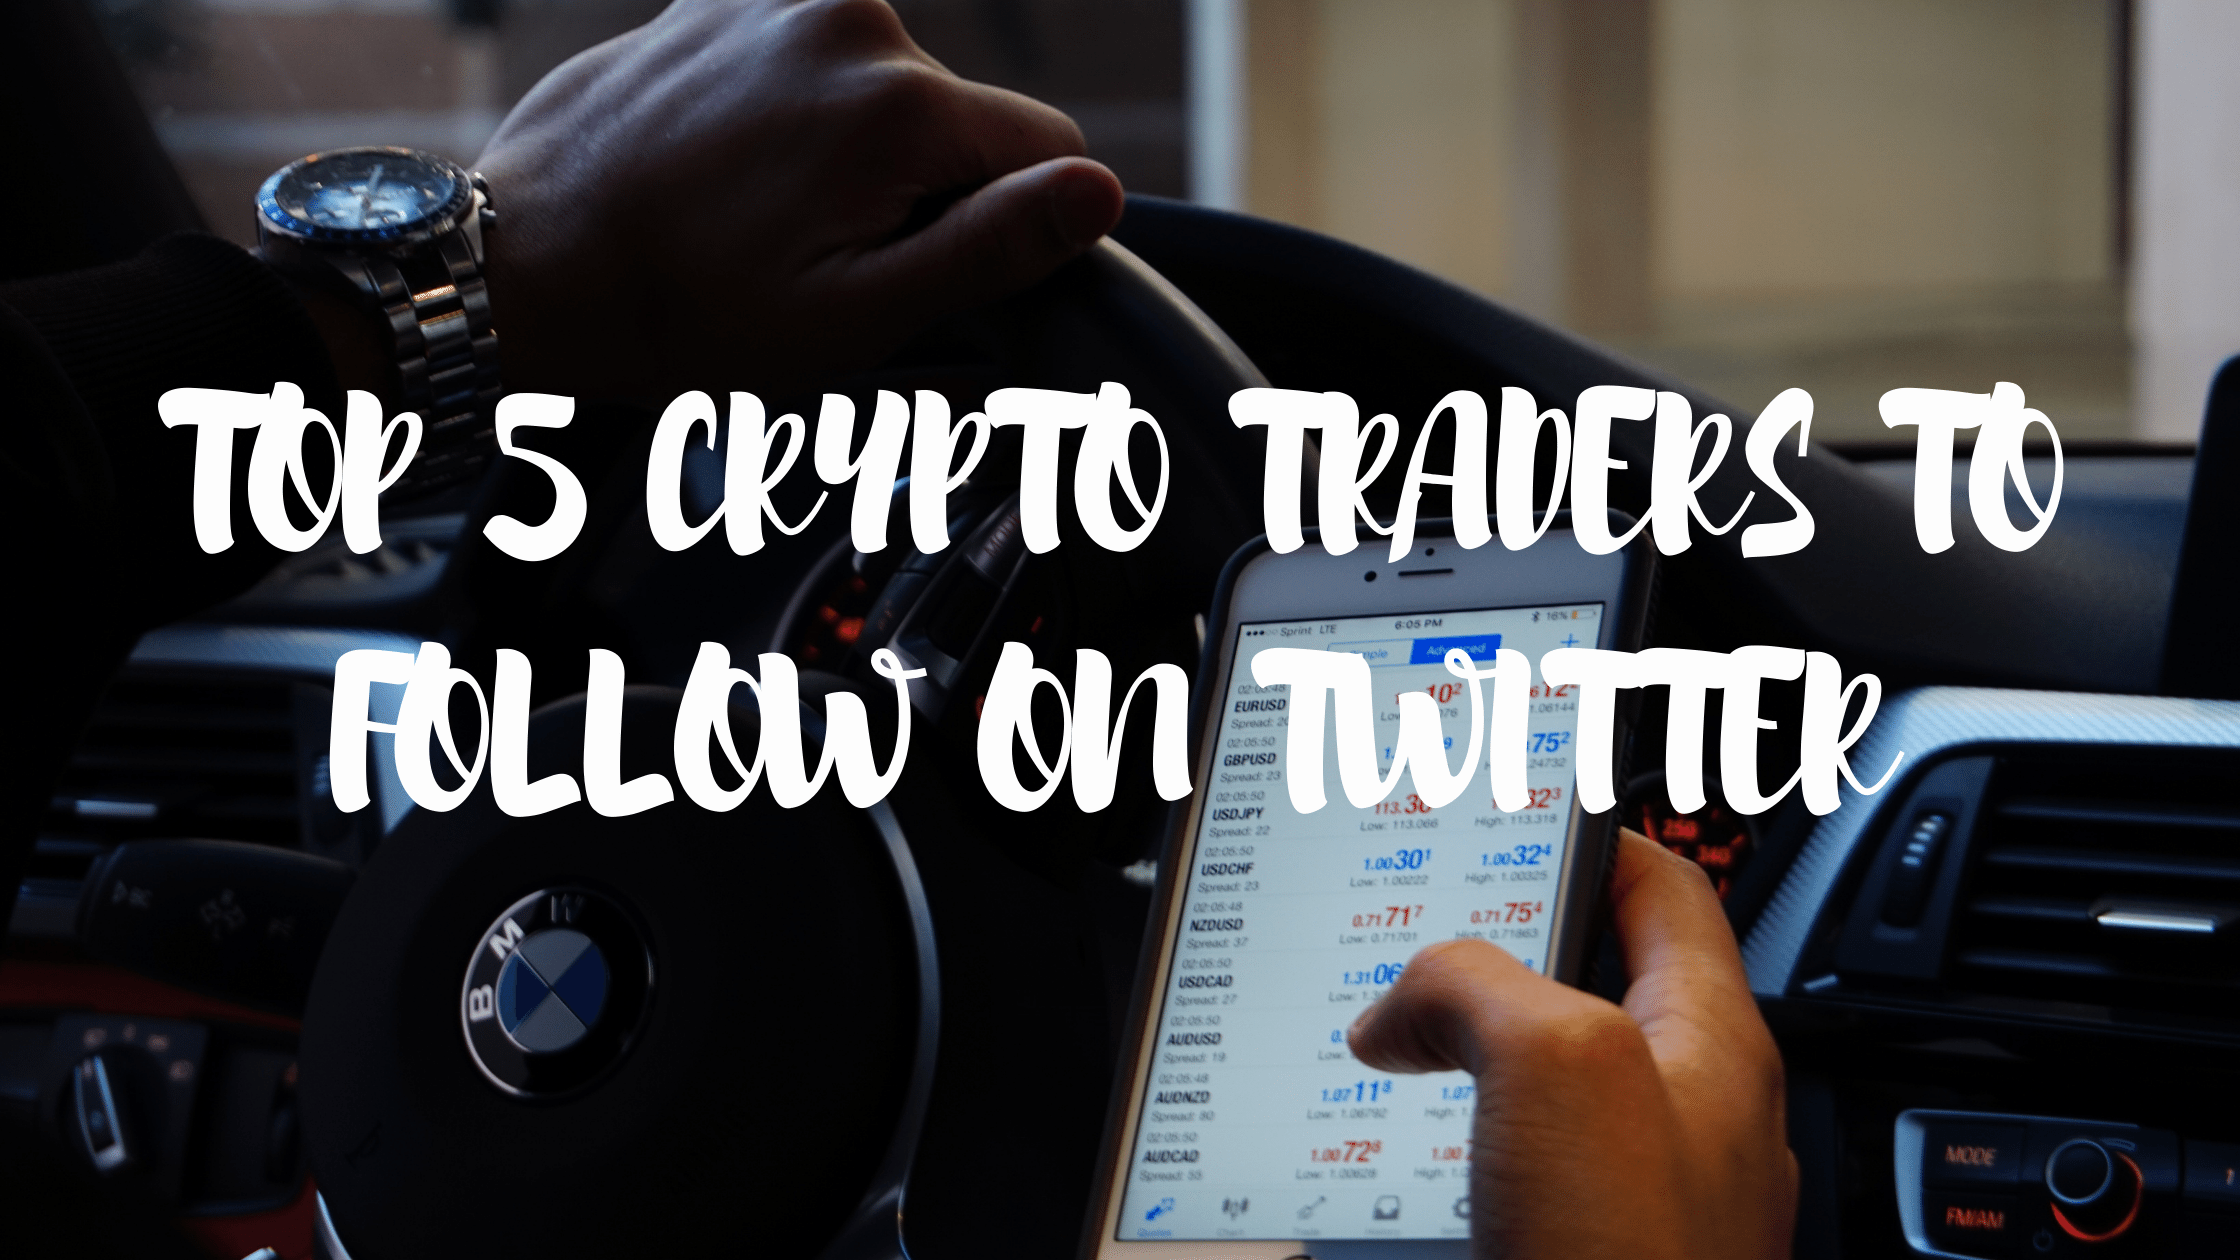 Top 5 Crypto traders to follow on Twitter in 2021 | ItsBlockchain